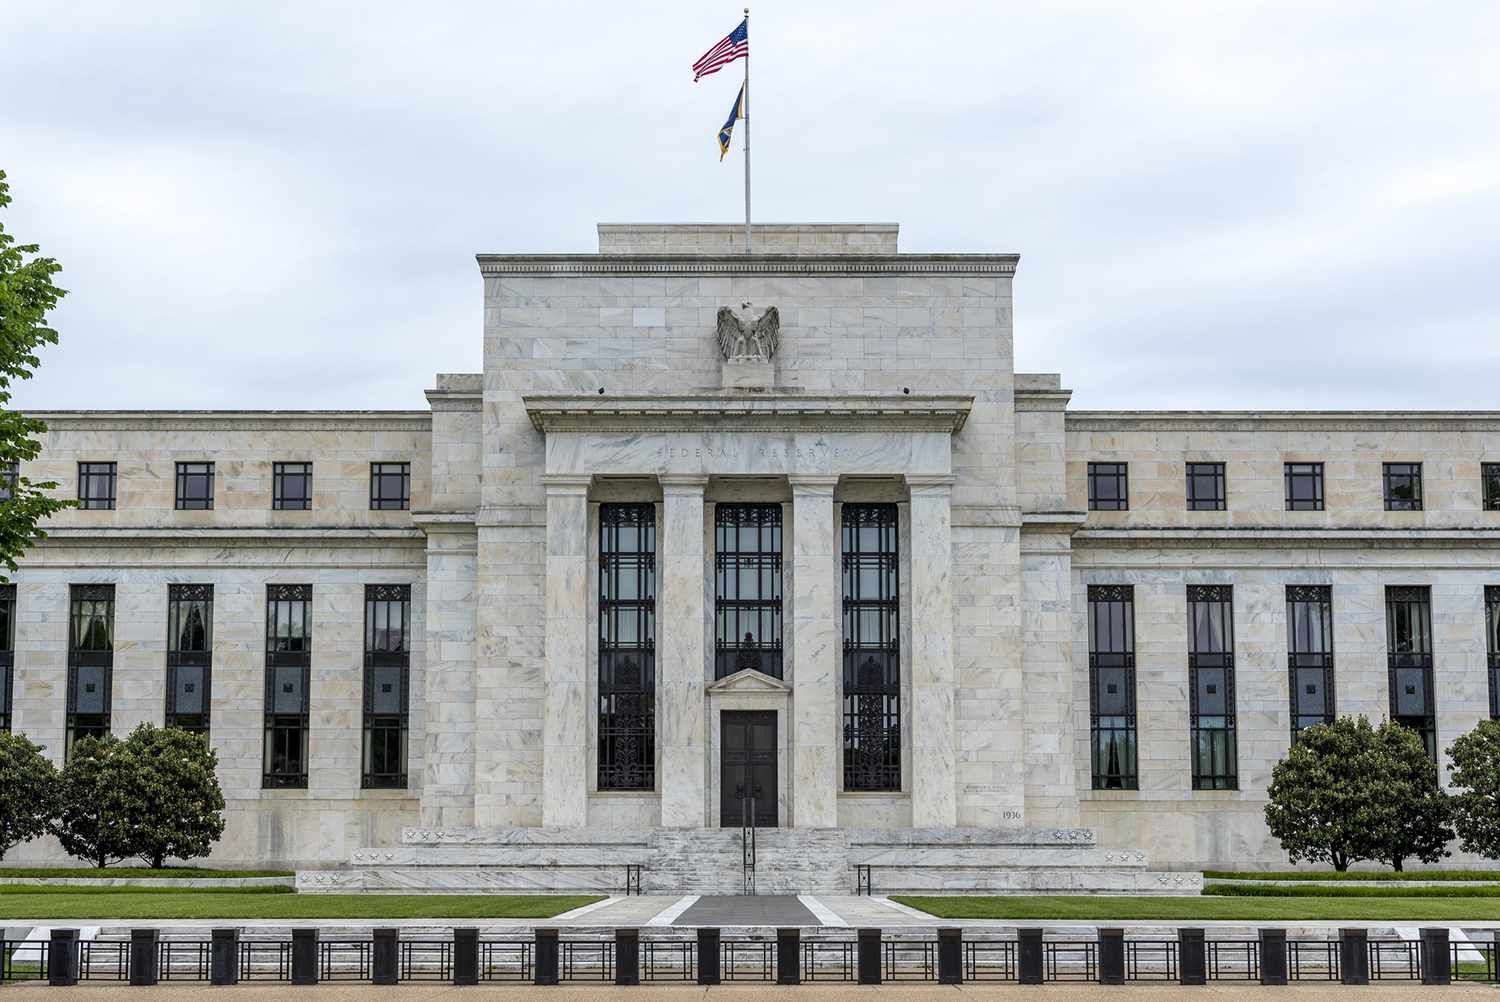 Why are the Federal Reserve meeting minutes important? How is it related to the global financial crisis of 2008?